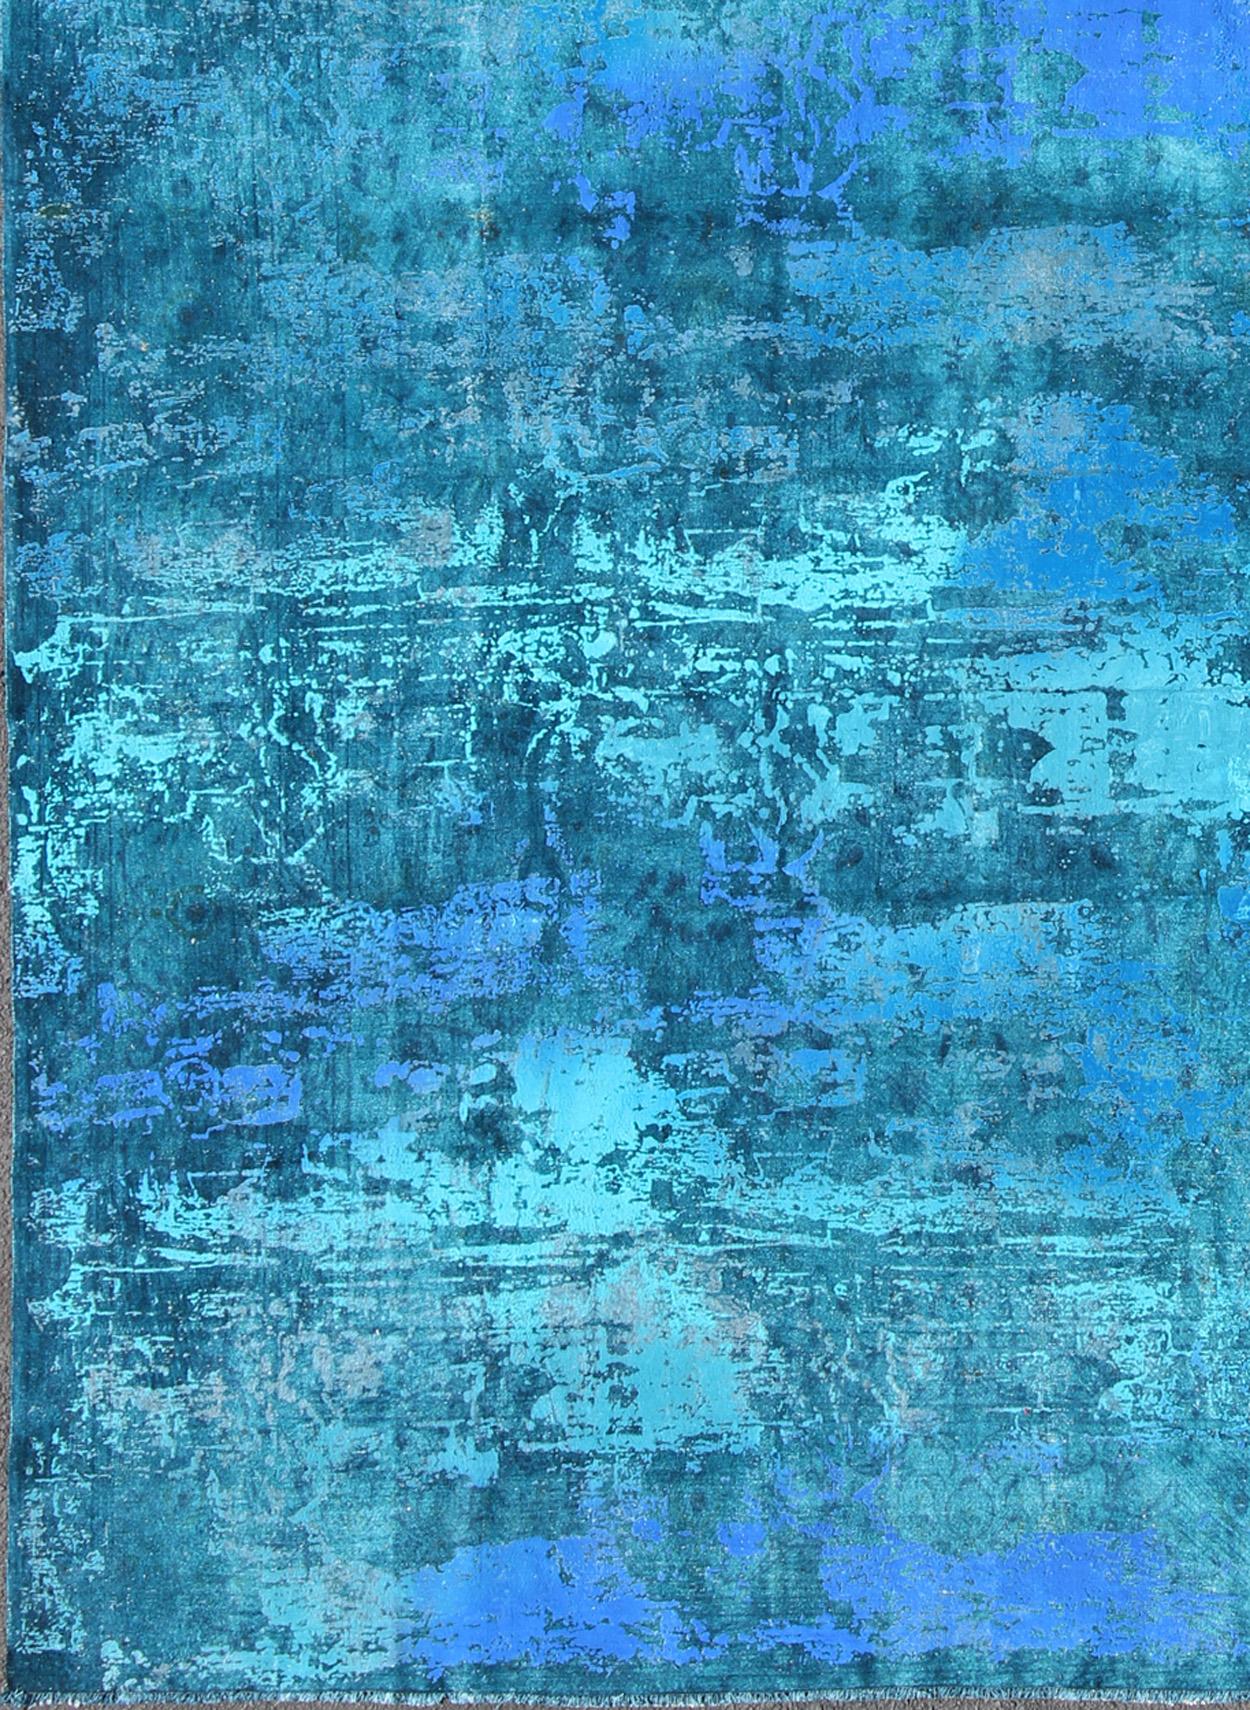 Vintage Persian modern rug with overdyed design in shades of blue, green, teal, rug m14-0403, country of origin / type: Iran / Modern

This Persian rug is one-of-a-kind with a distressed finish that emphasizes a modern, yet rustic, design